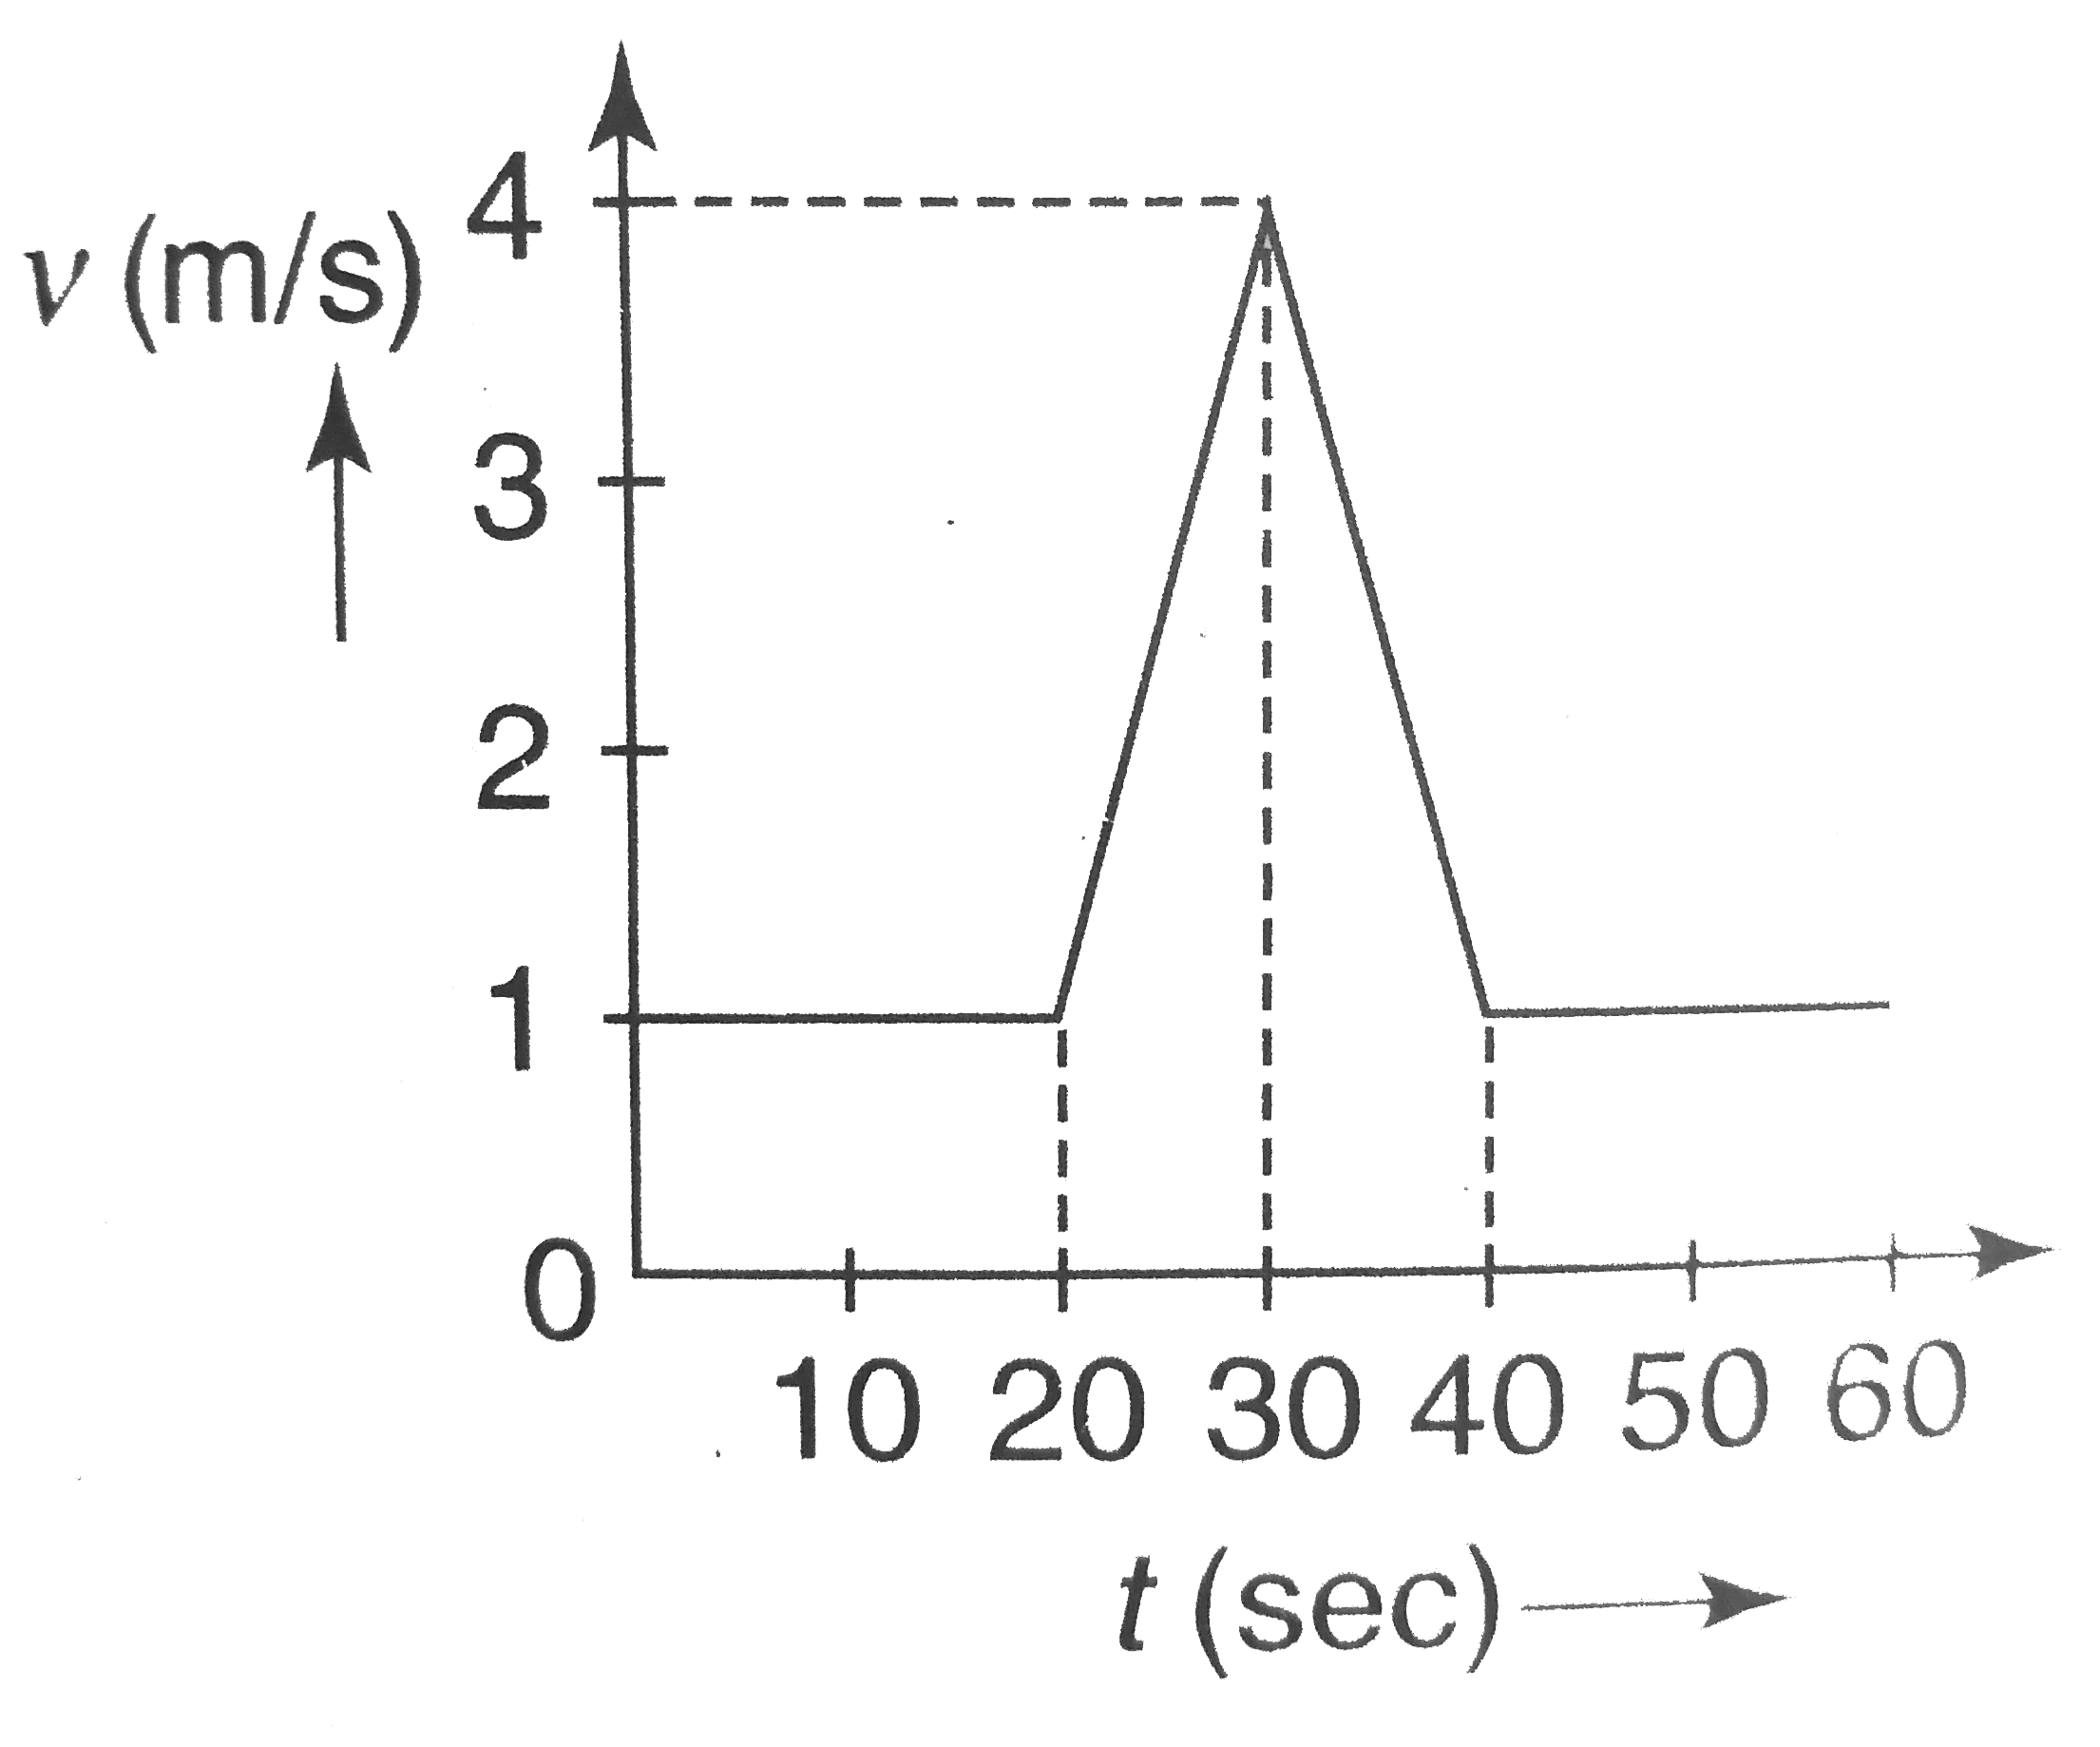 Velocity-time graph for a moving object is shown in the figure. Total displacement of the object during the time interval when there is non-zero acceleration and retardation is.